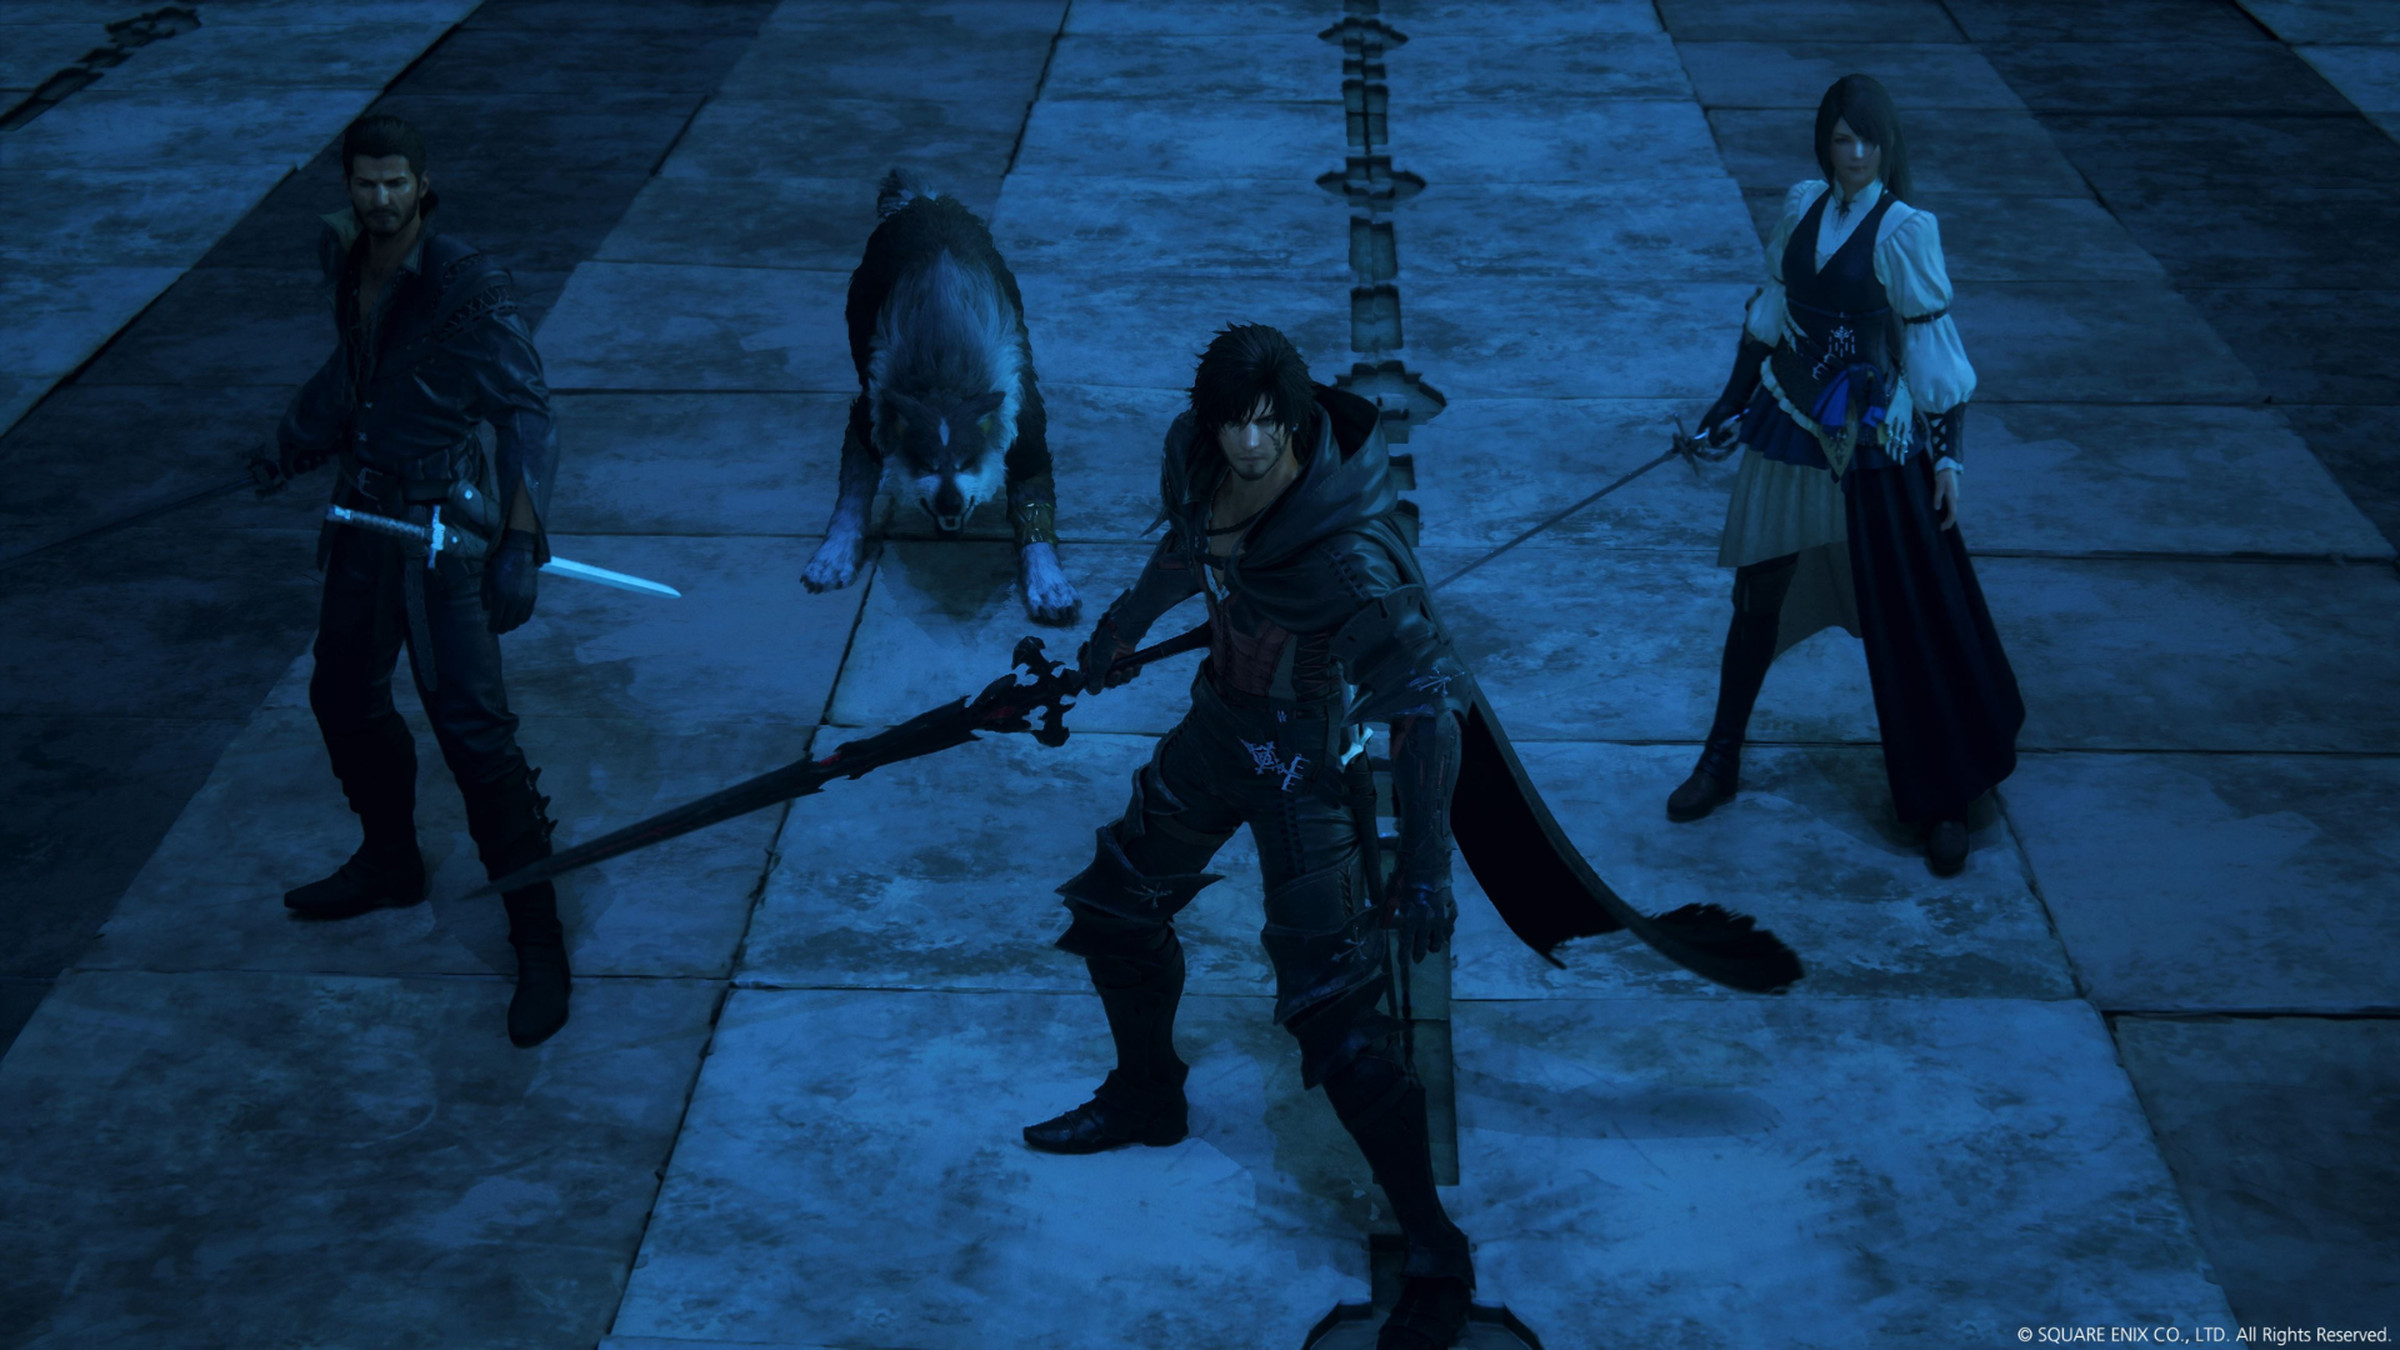 Screenshot from Final Fantasy XVI featuring Cid, Torgal the wolf, Clive, and Jill